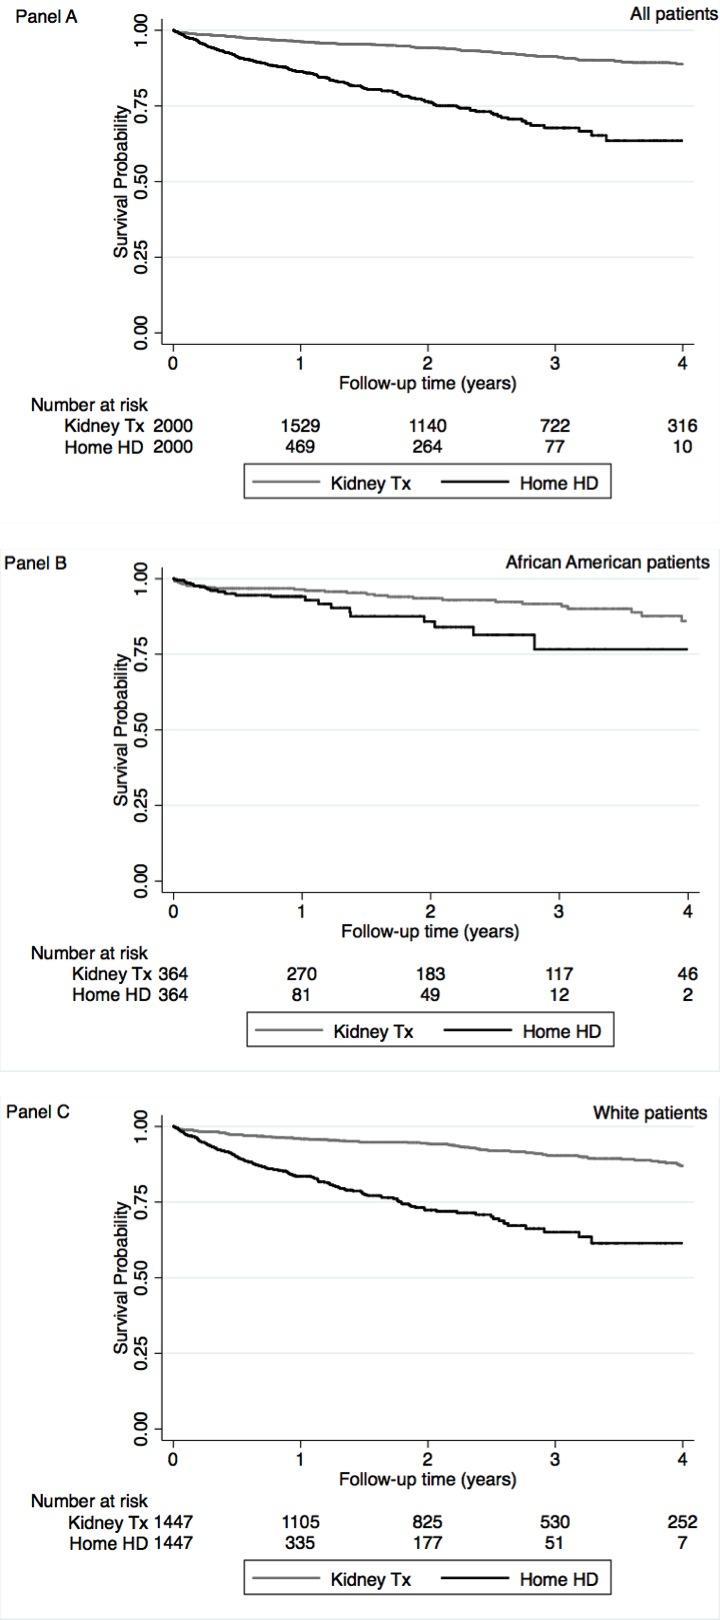 Kidney Transplantation Prolongs Survival Compared with Home Hemodialysis